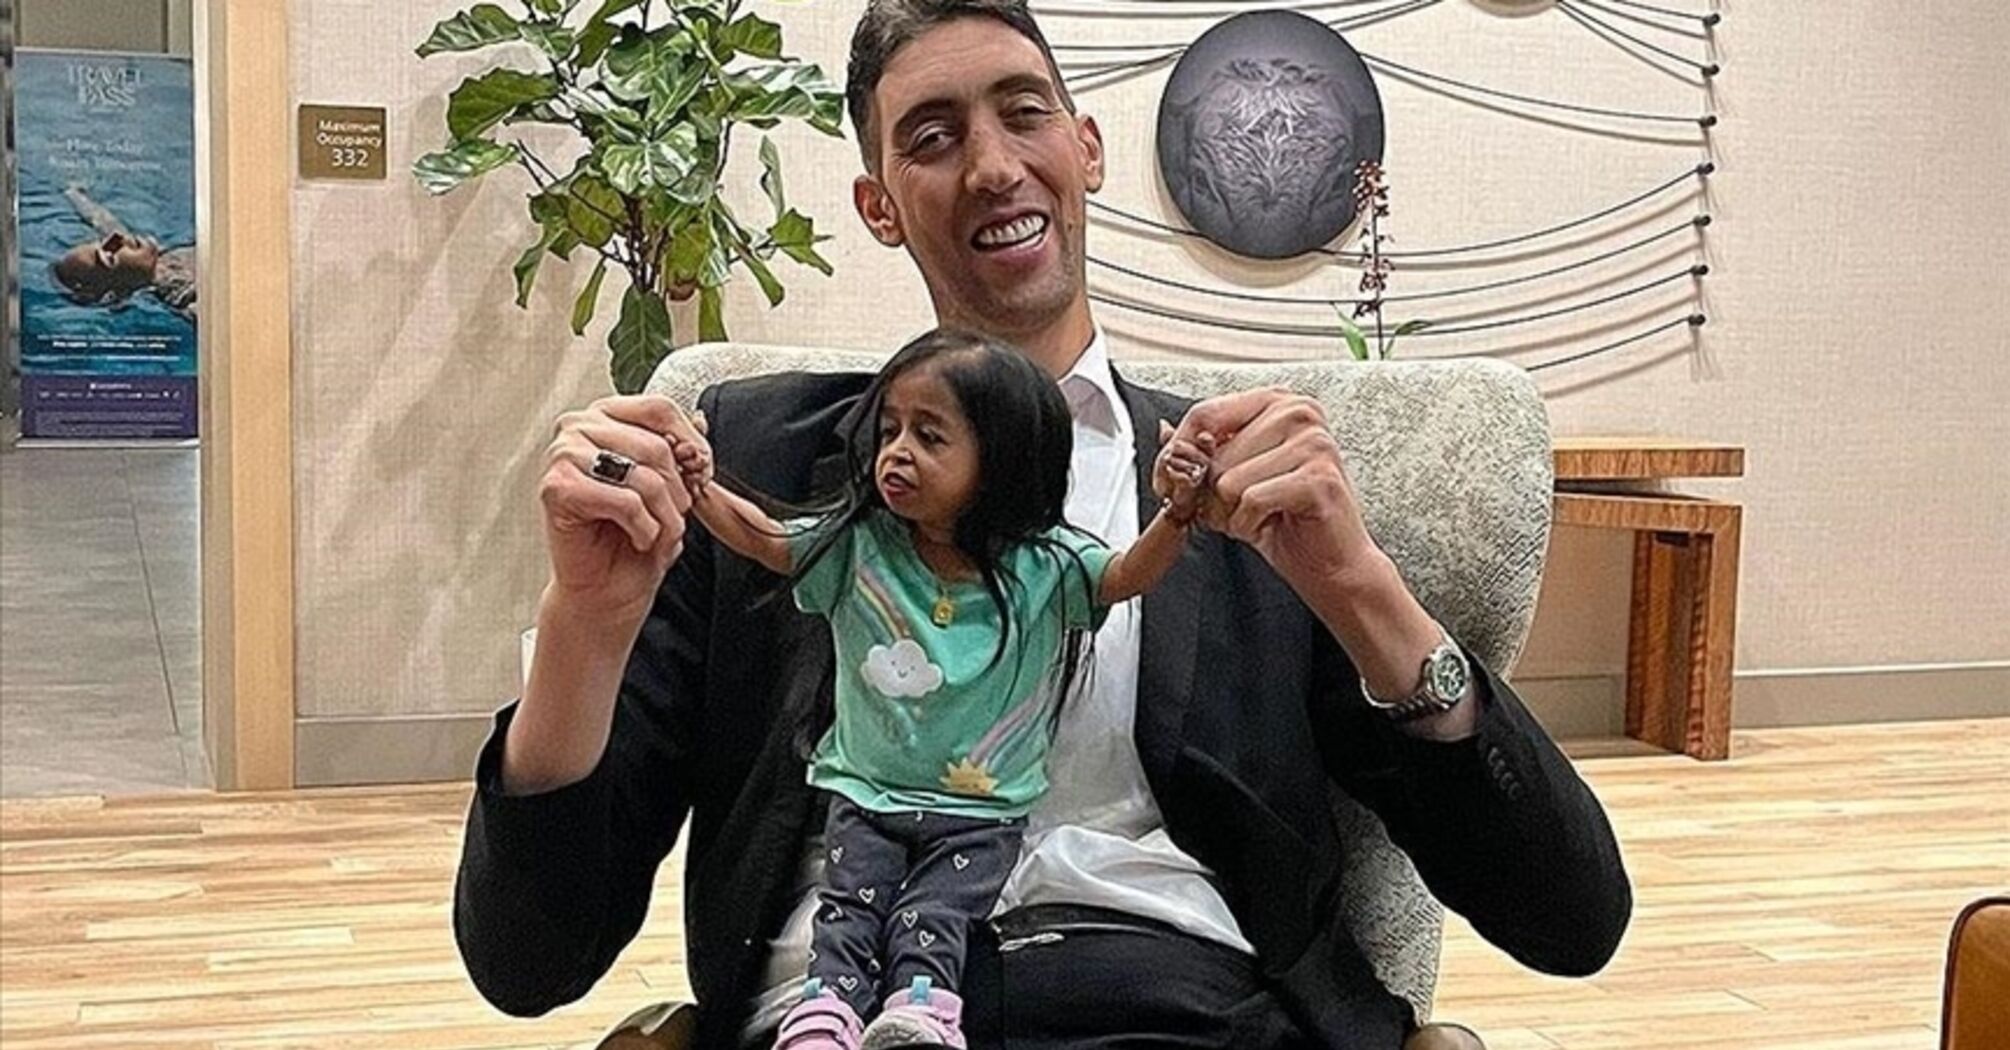 The tallest man in the world met the shortest woman